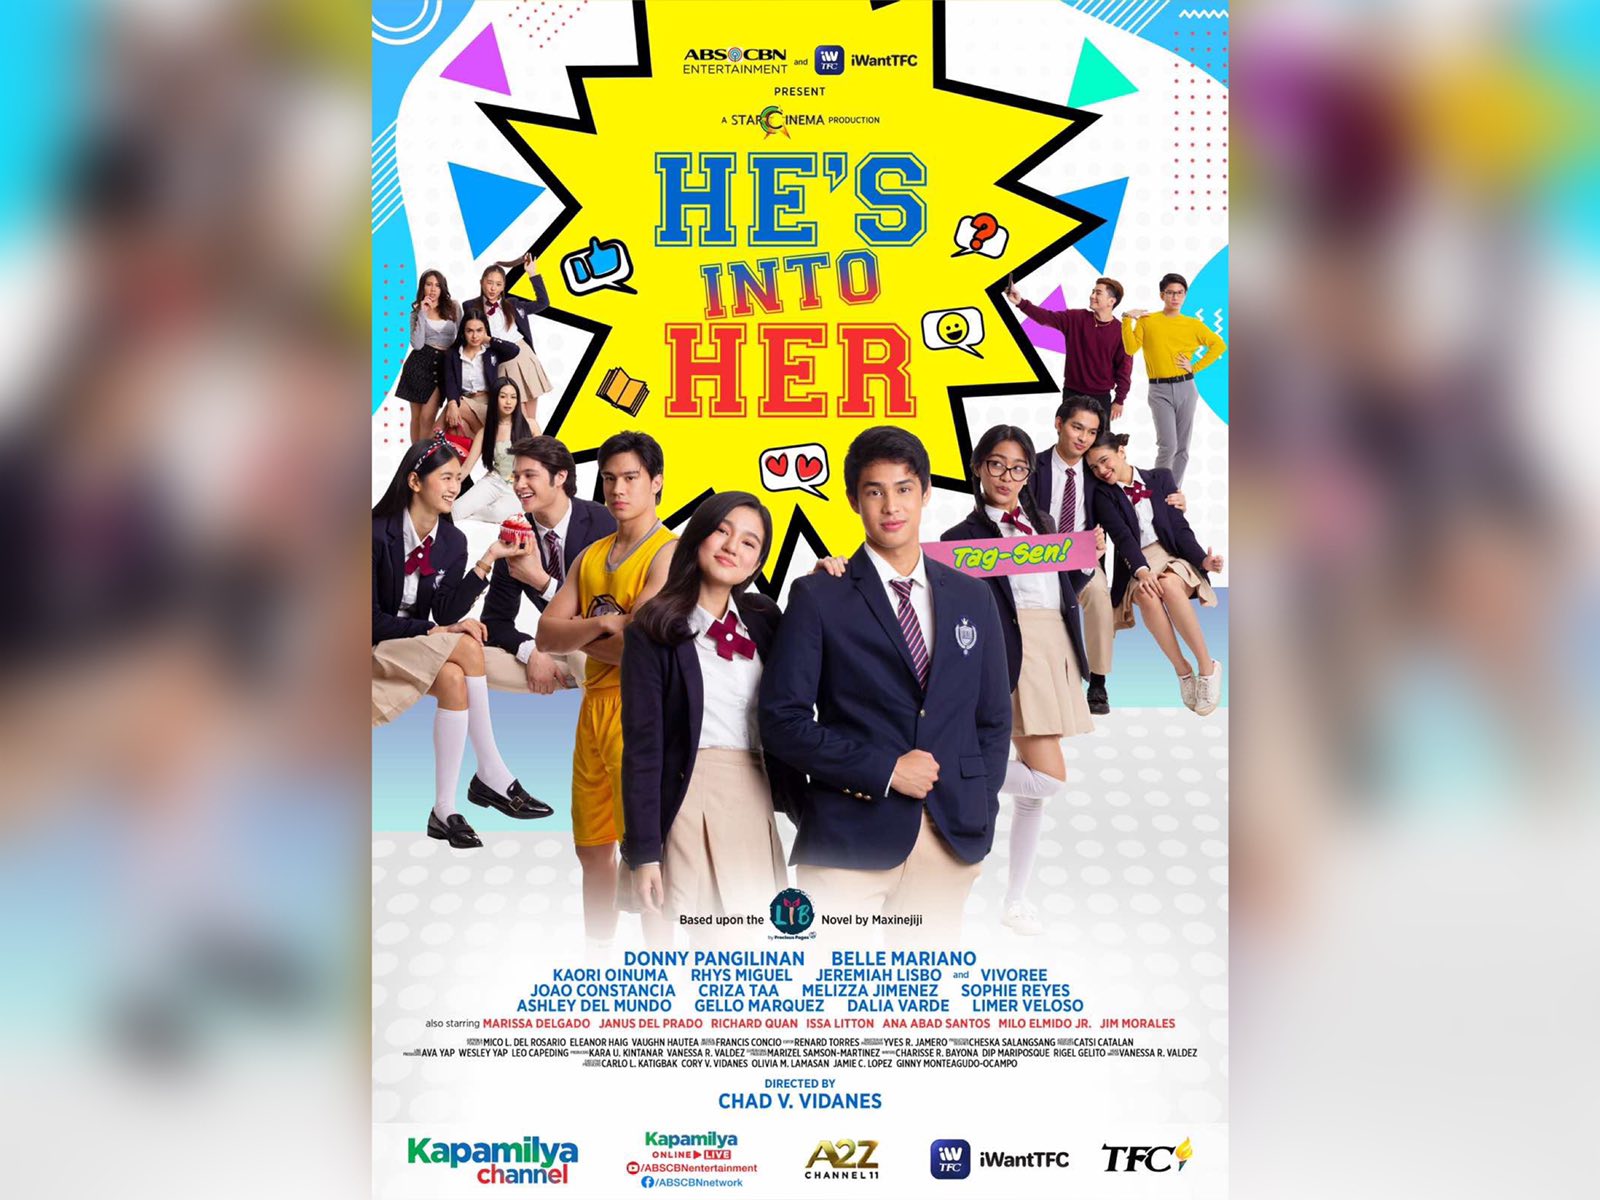 A youthful take on self-rediscovery, friendship, and love in the upcoming digital series “He’s Into Her”